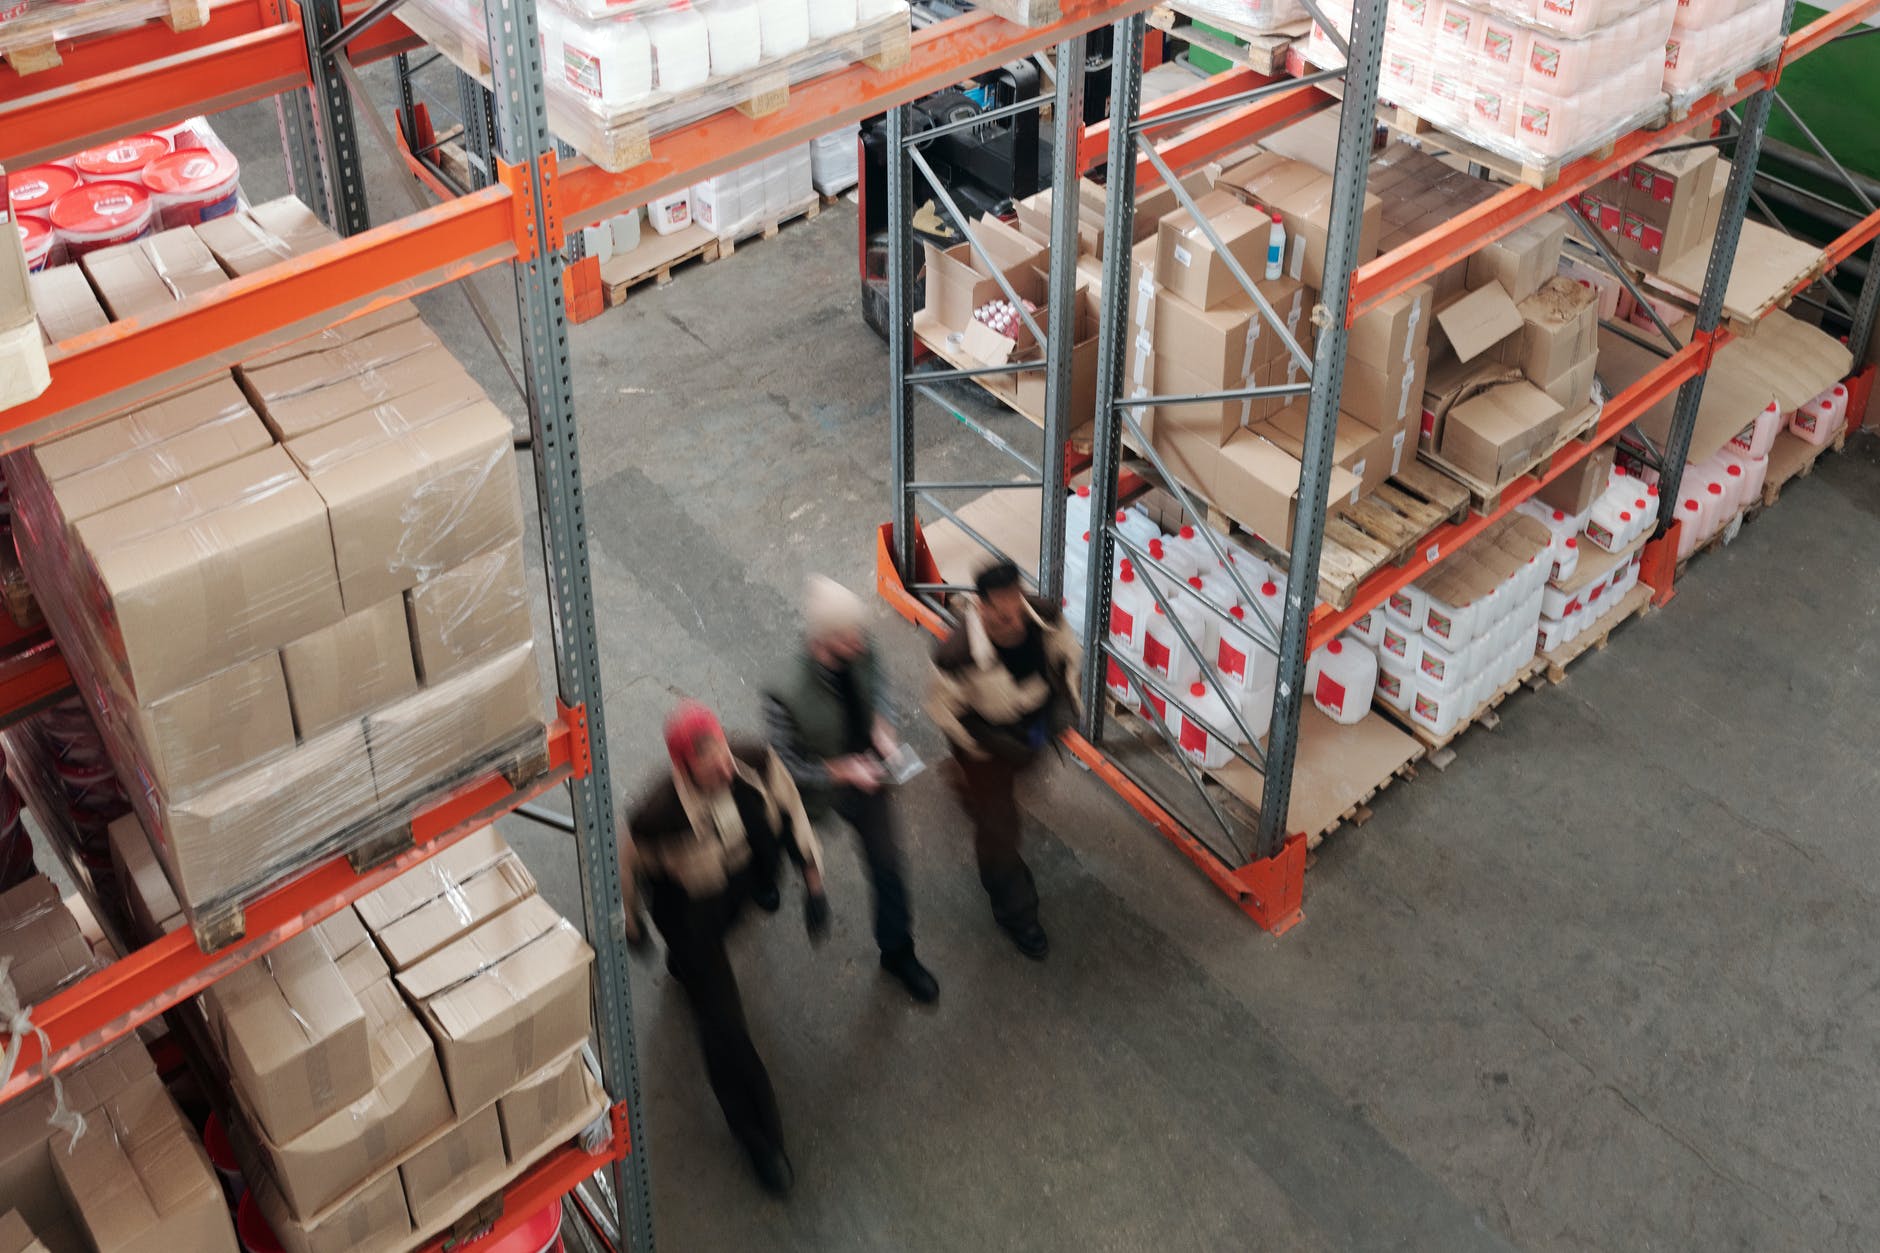 Warehouse workers move inventory much like Amazon FBA 